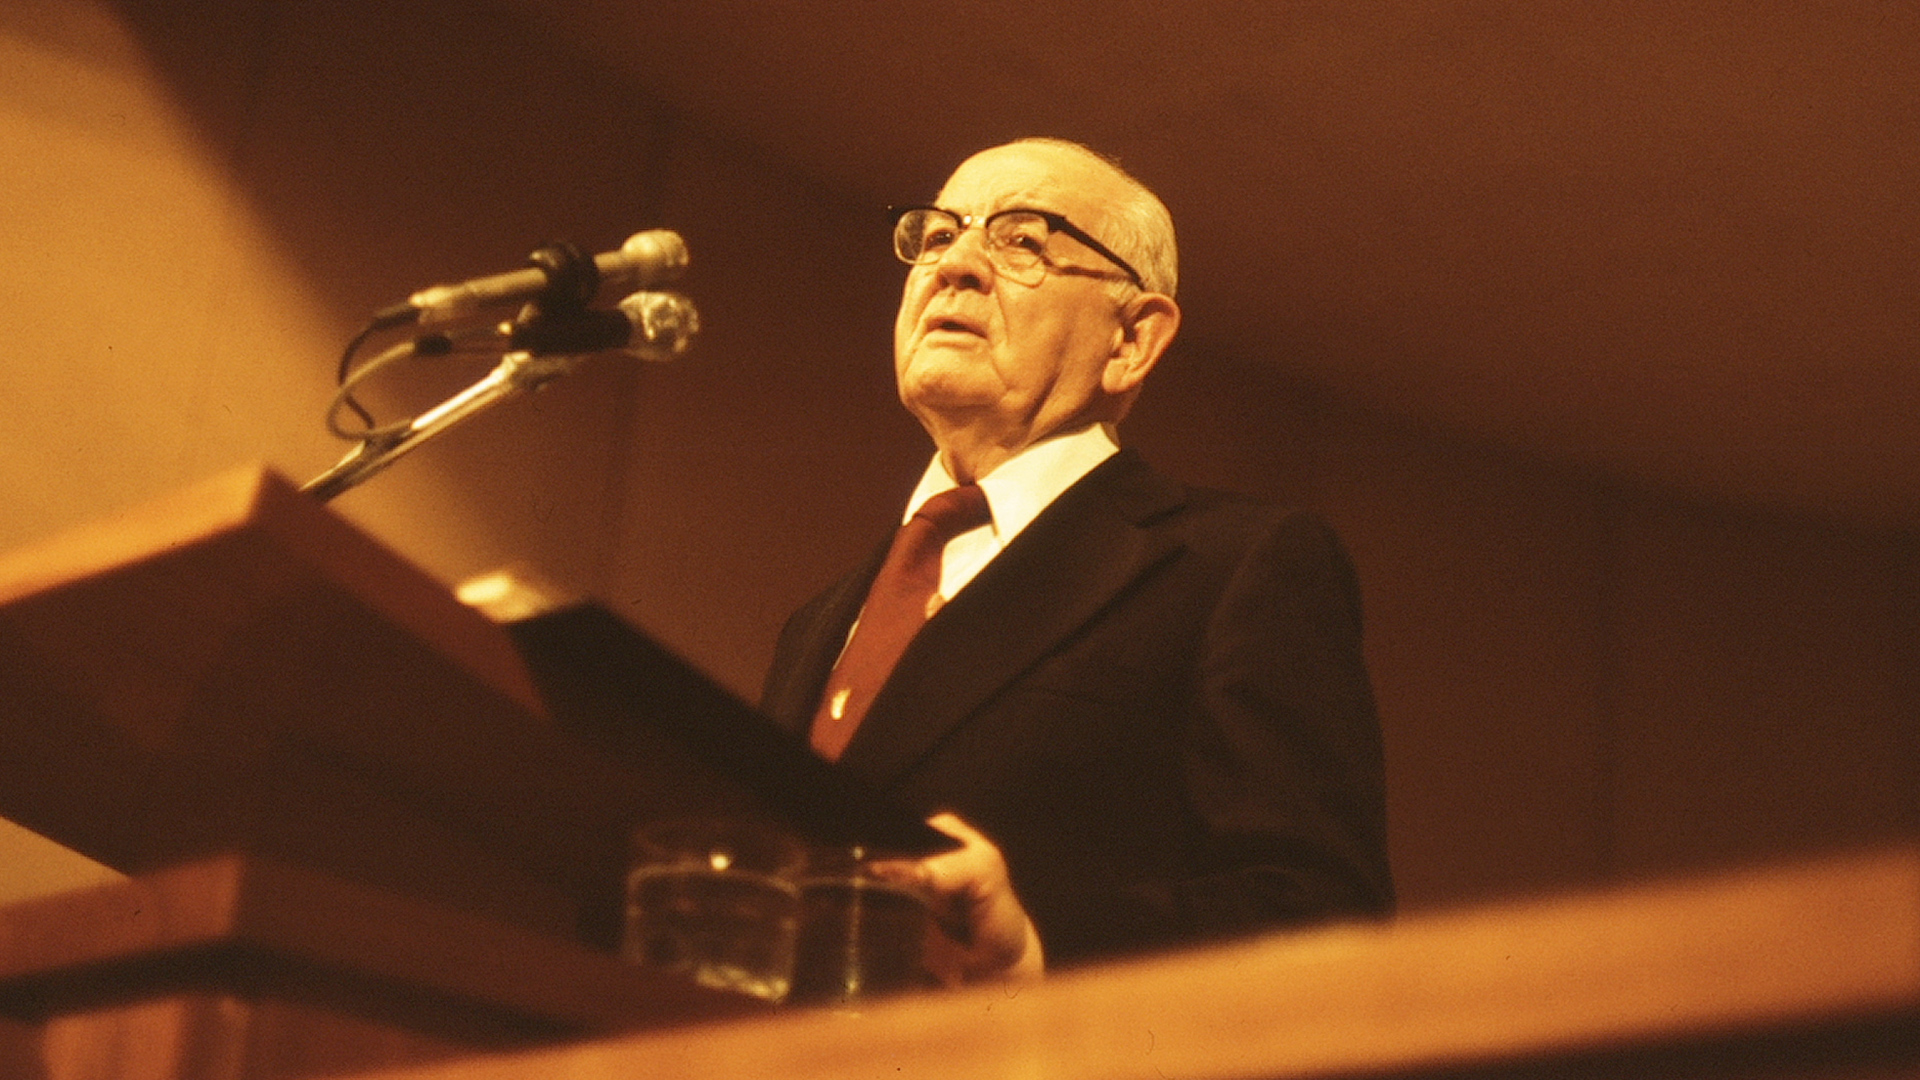 Spencer W. Kimball speaking at pulpit